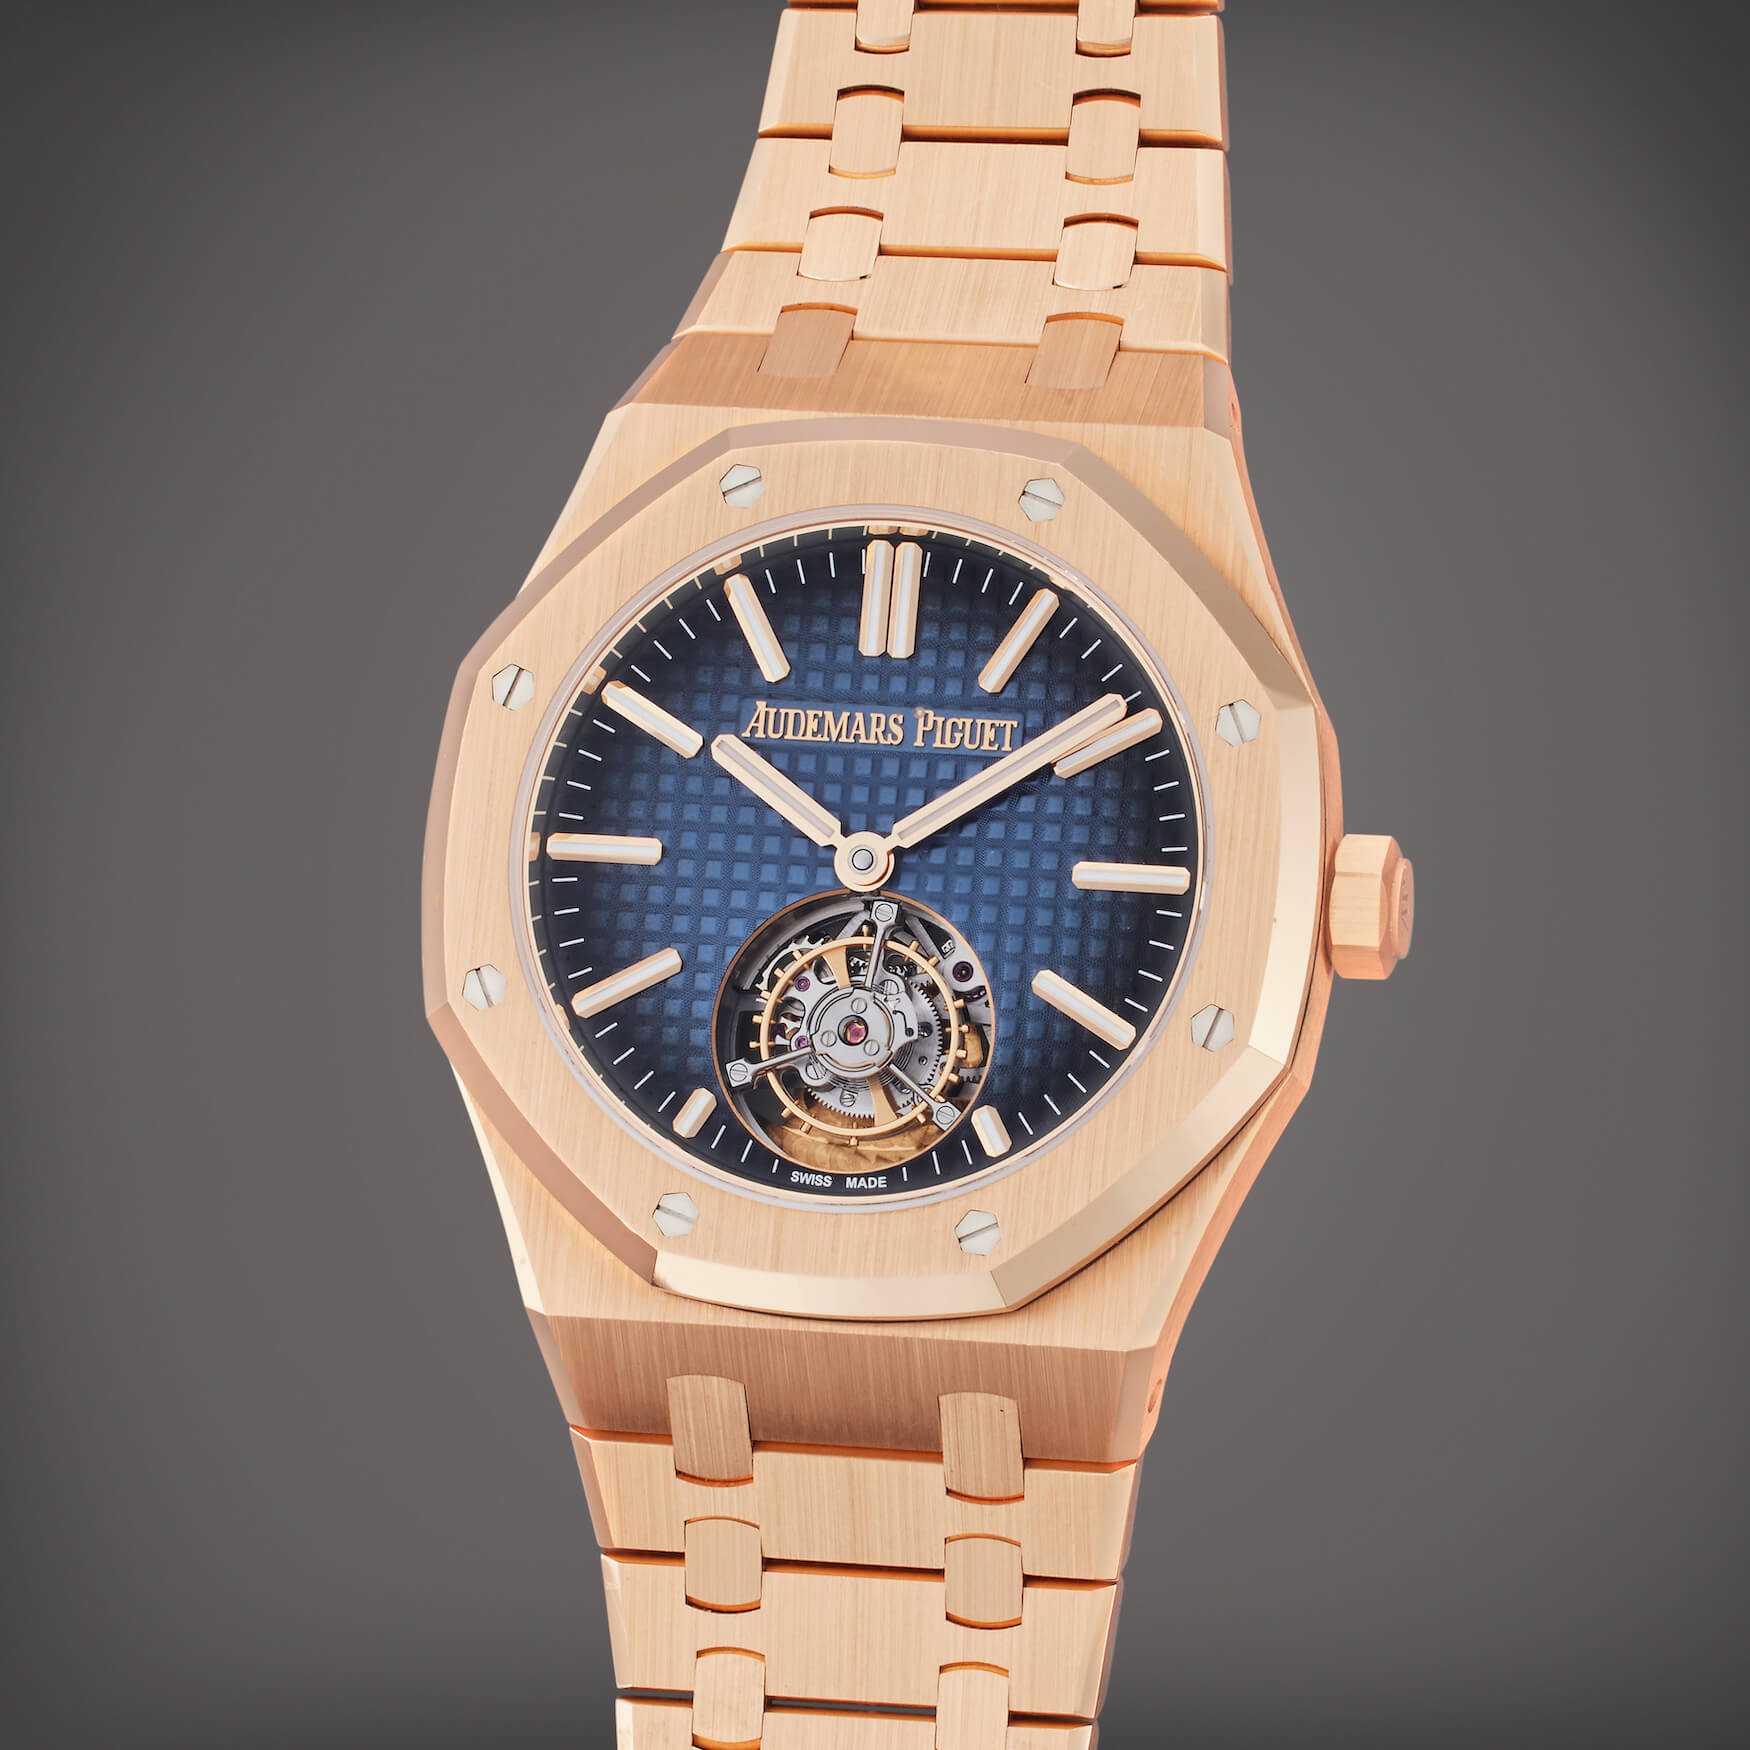 Audemars Piguet Reference 26730OR OO 1320OR 01 Royal Oak Tourbillon 50th Anniversary